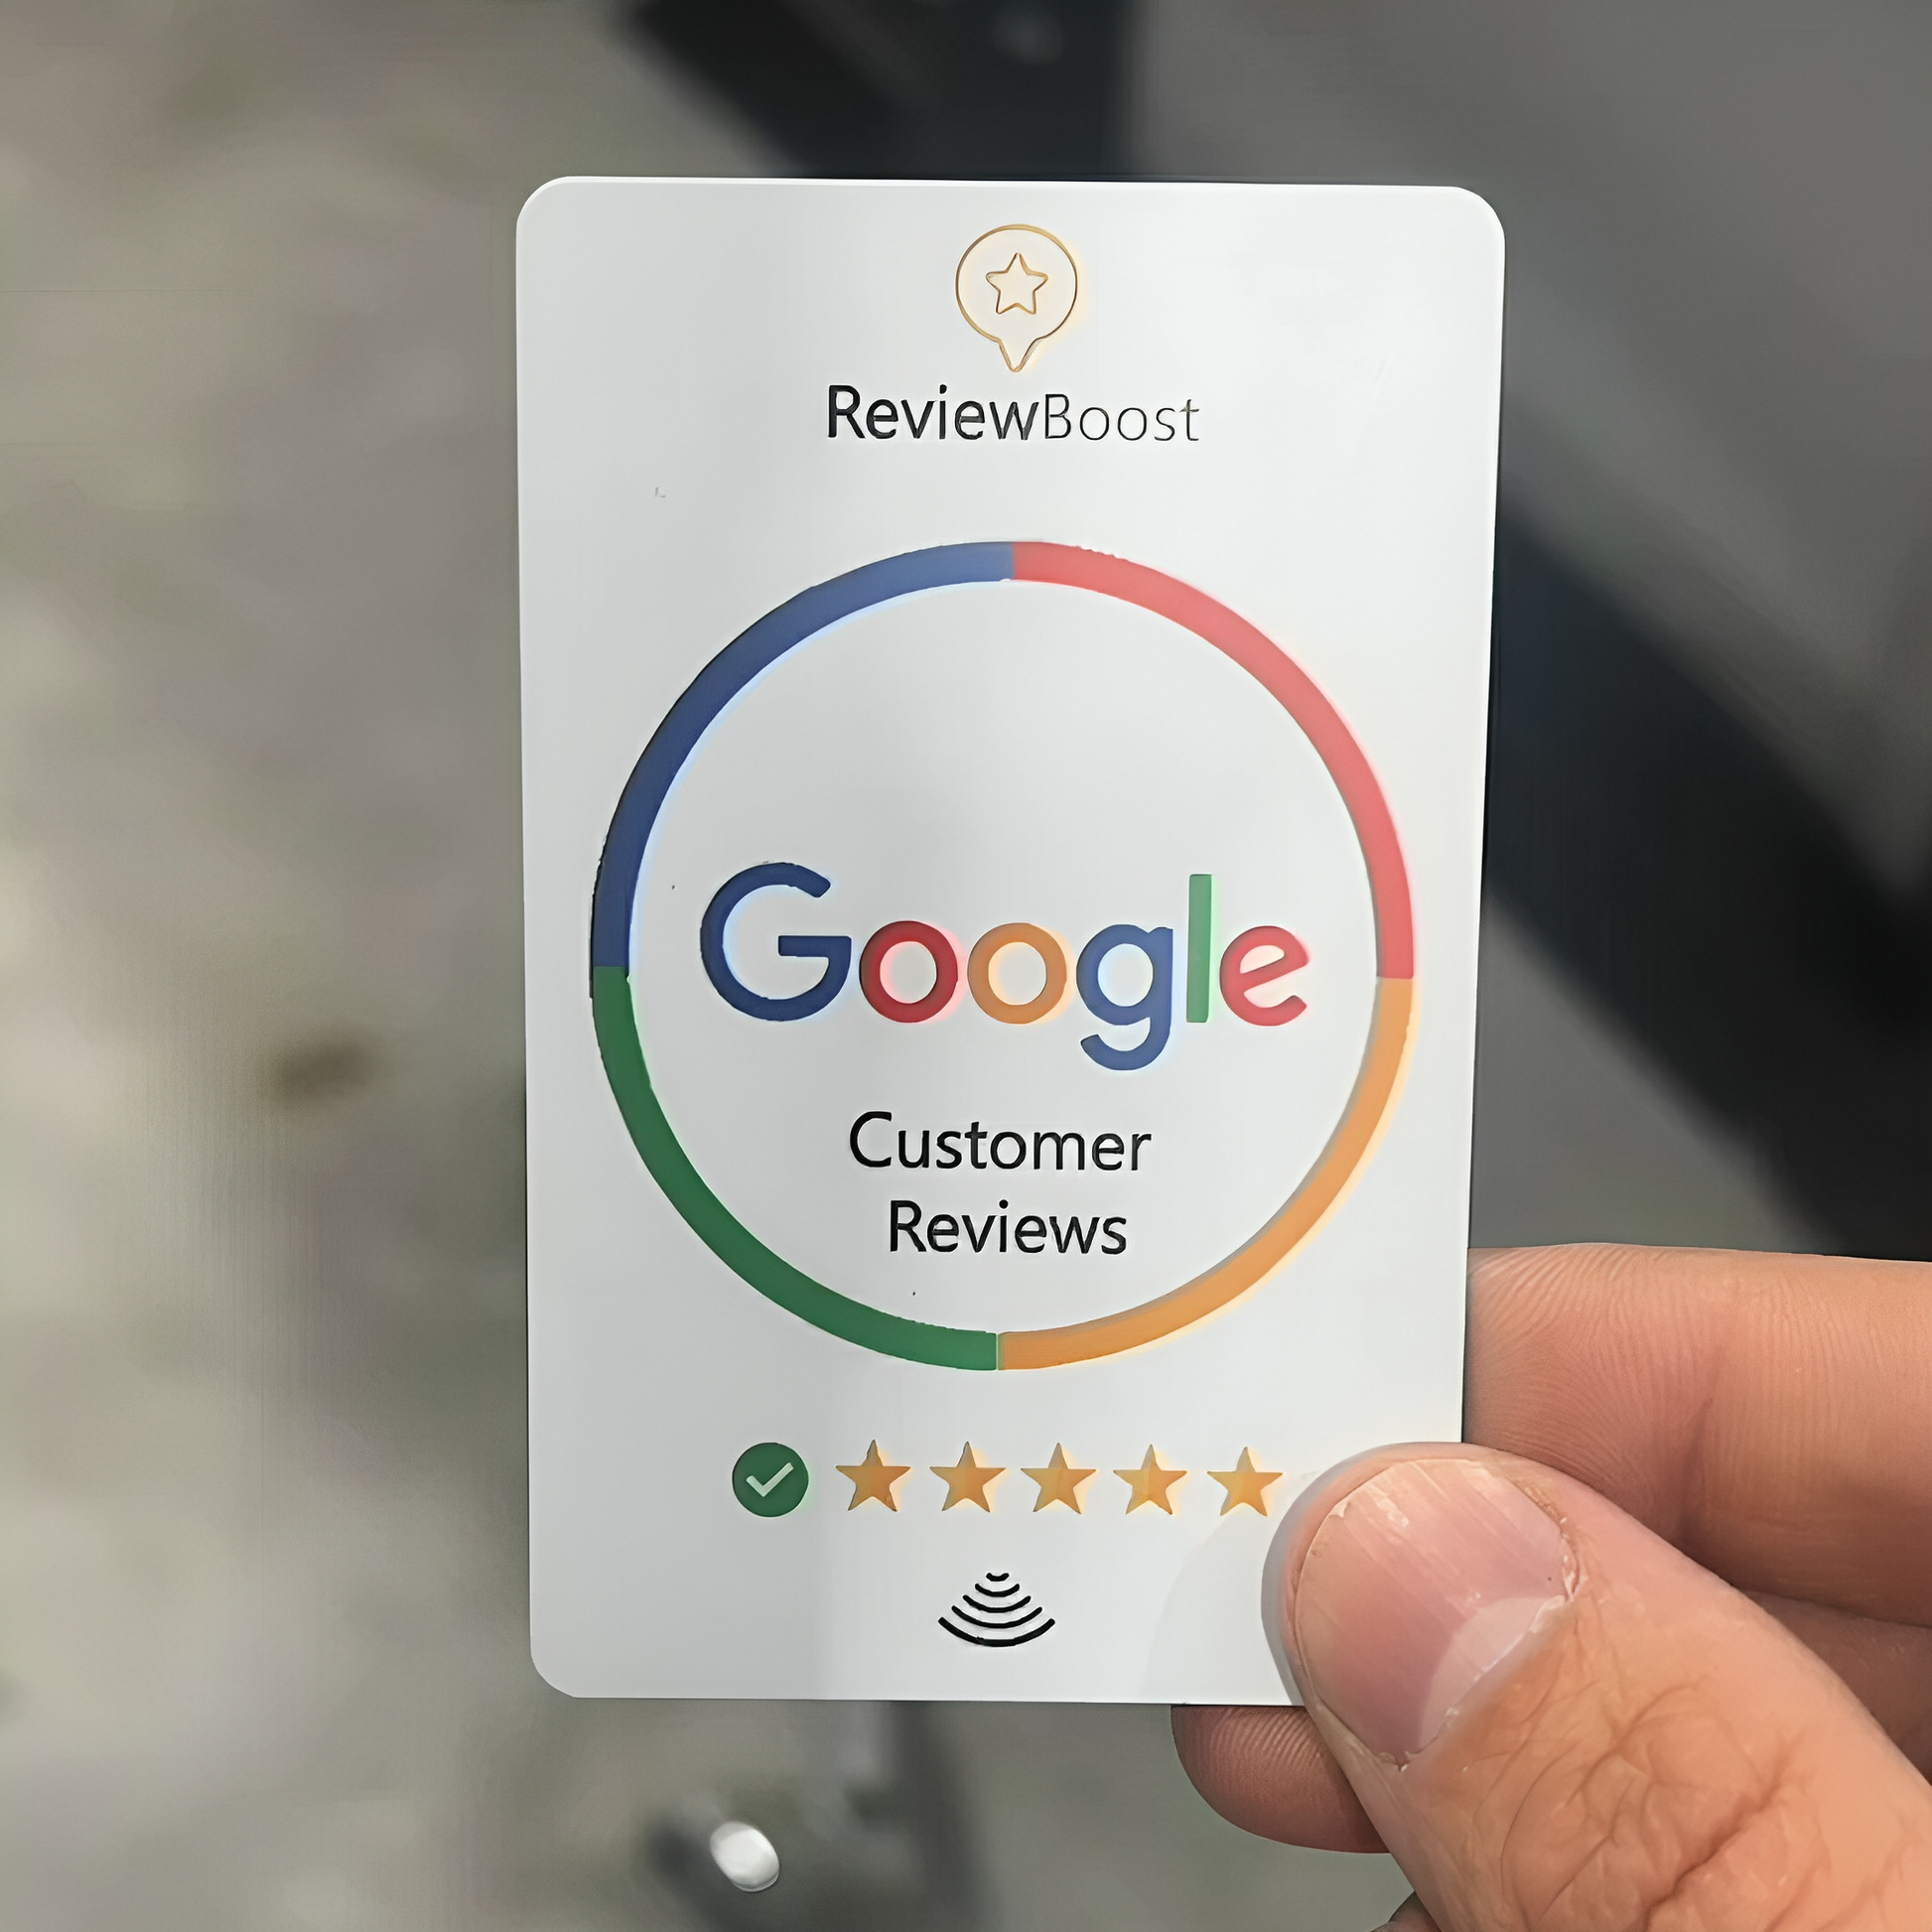 ReviewBoost NFC Google Review Card - Easily collect Google reviews with our NFC-enabled review card.